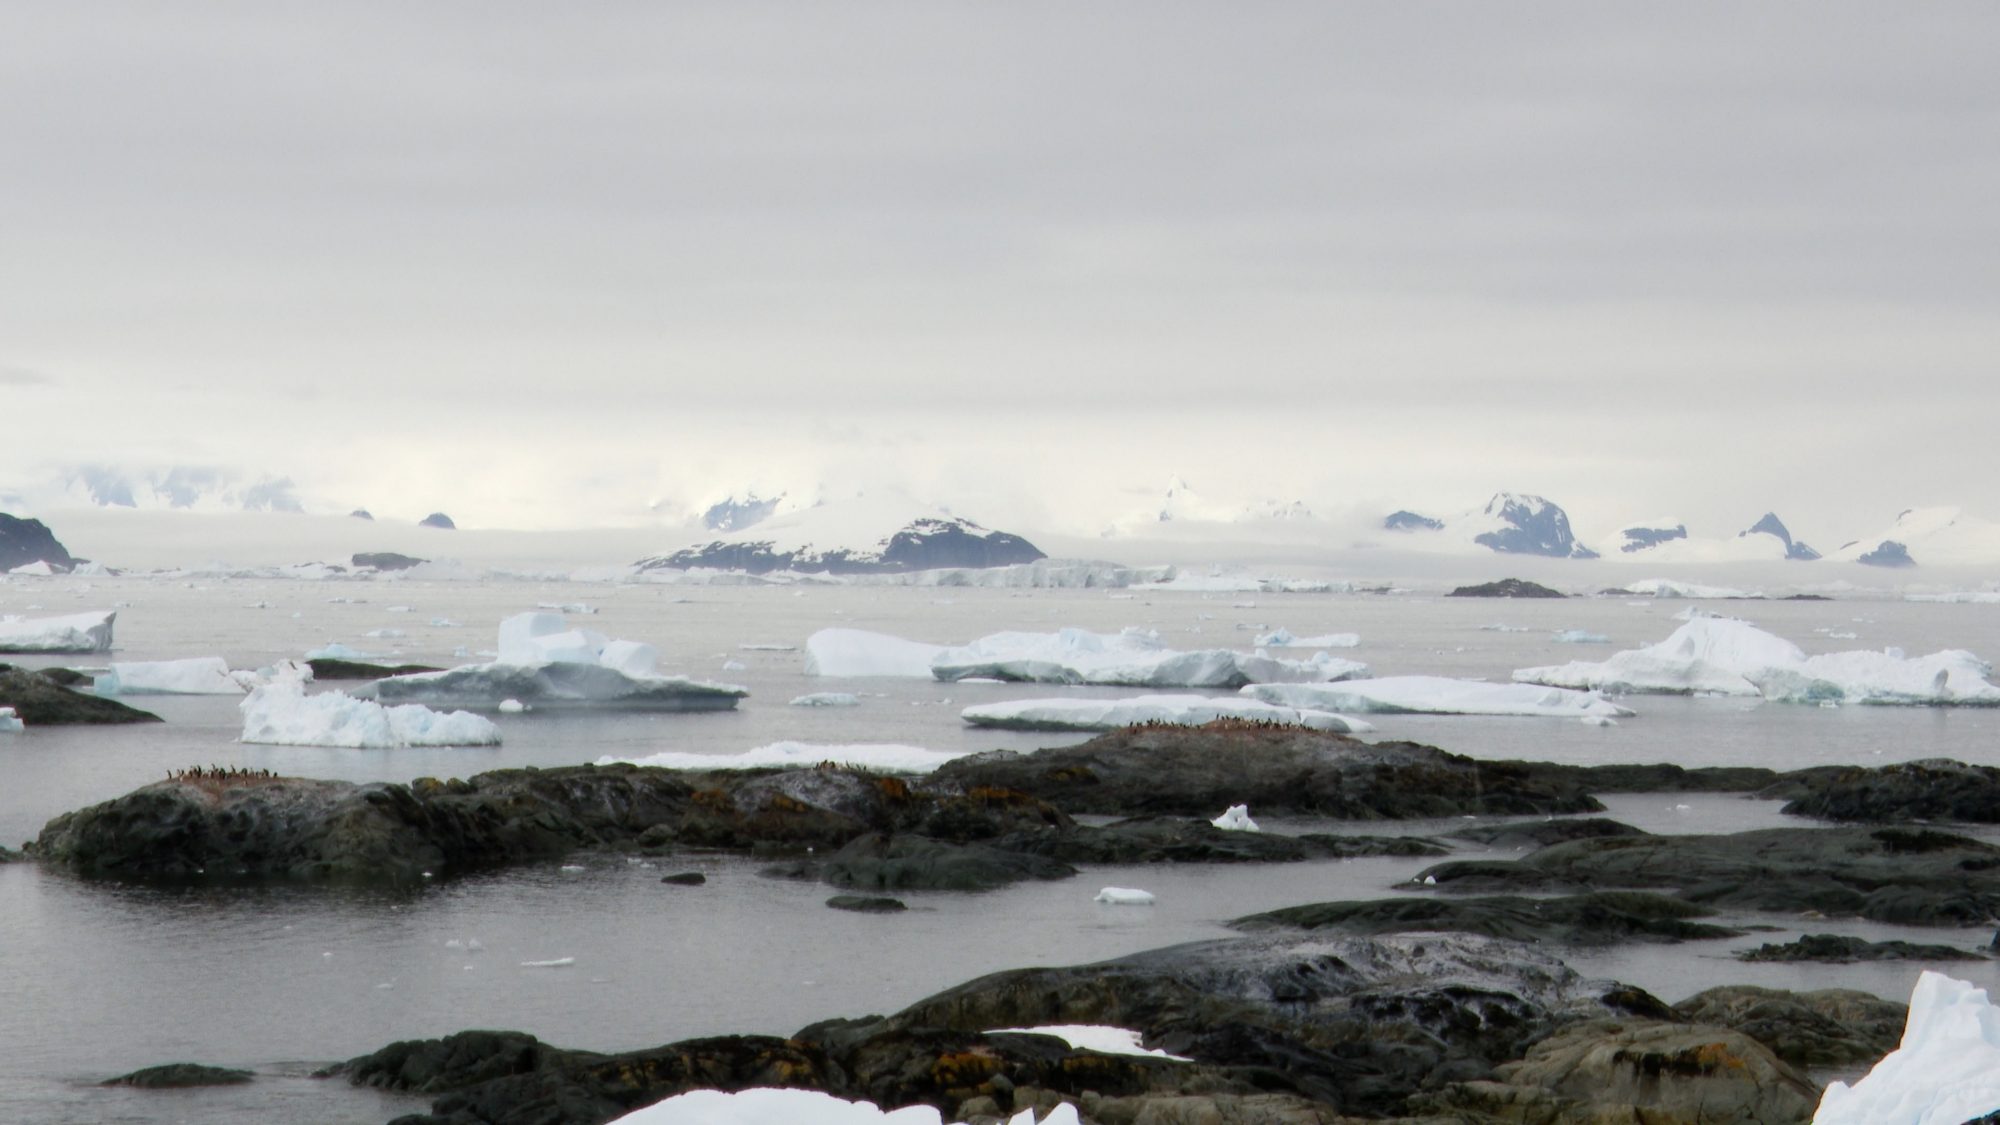 The beautiful Yalour Islands and its Adelie Penguins – Antarctica, 2020